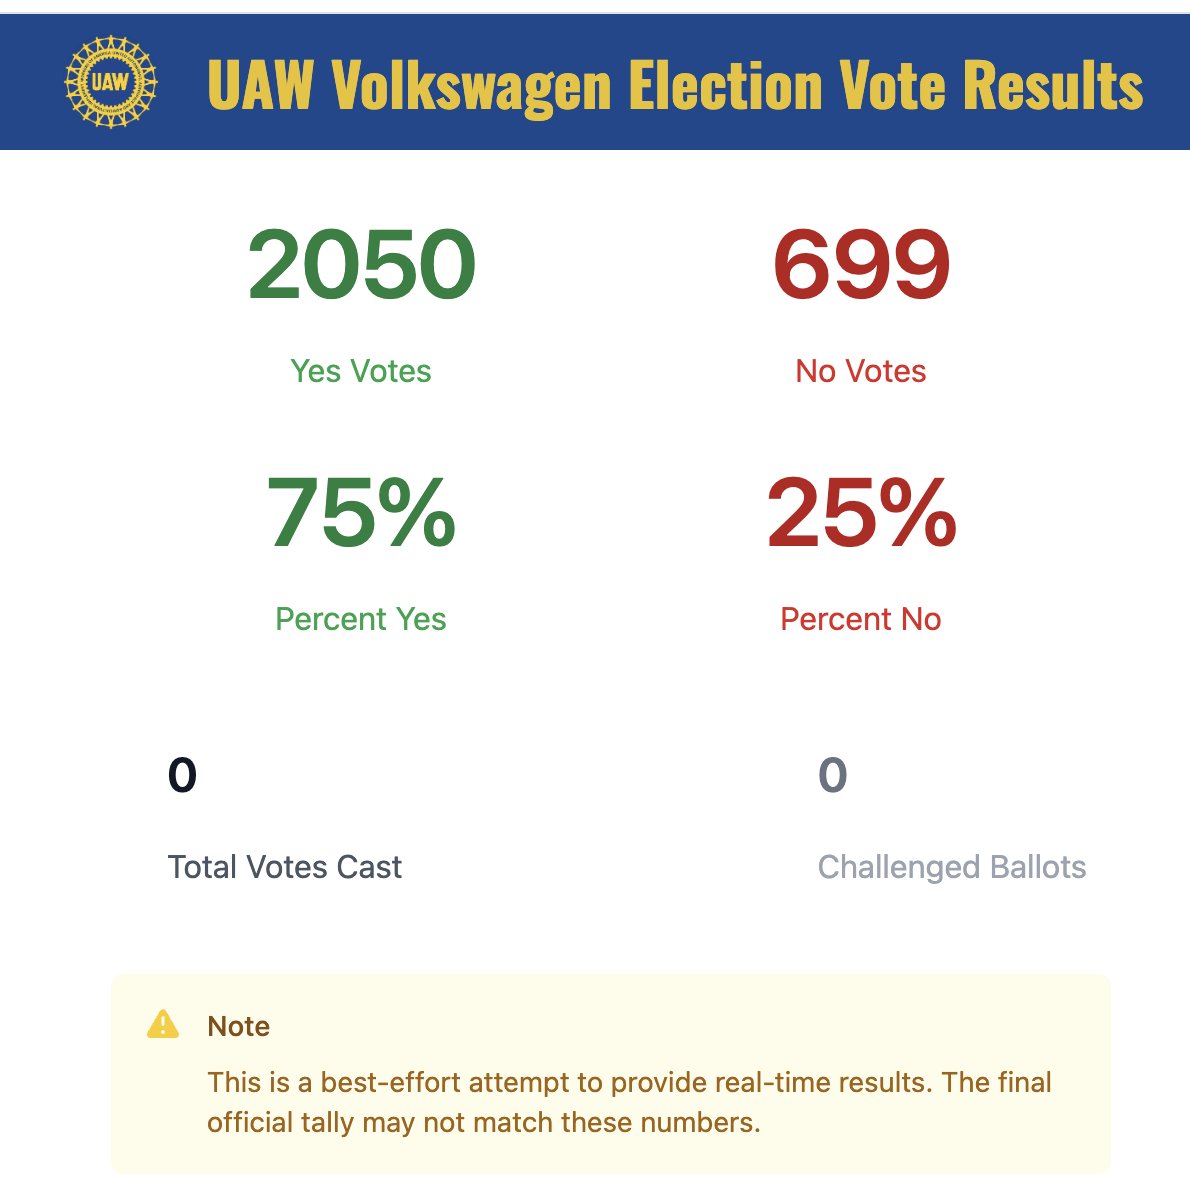 BREAKING--The UAW is already celebrating its HUGE HISTORIC WIN IN CHATTANOOGA -With more than 60% of the vote counted, the UAW is winning 2,050 to 699. That's a colossal 75% for & 25% against Labor historian Joseph McCartin says, 'HUGE! This is the break we've waited years for.'